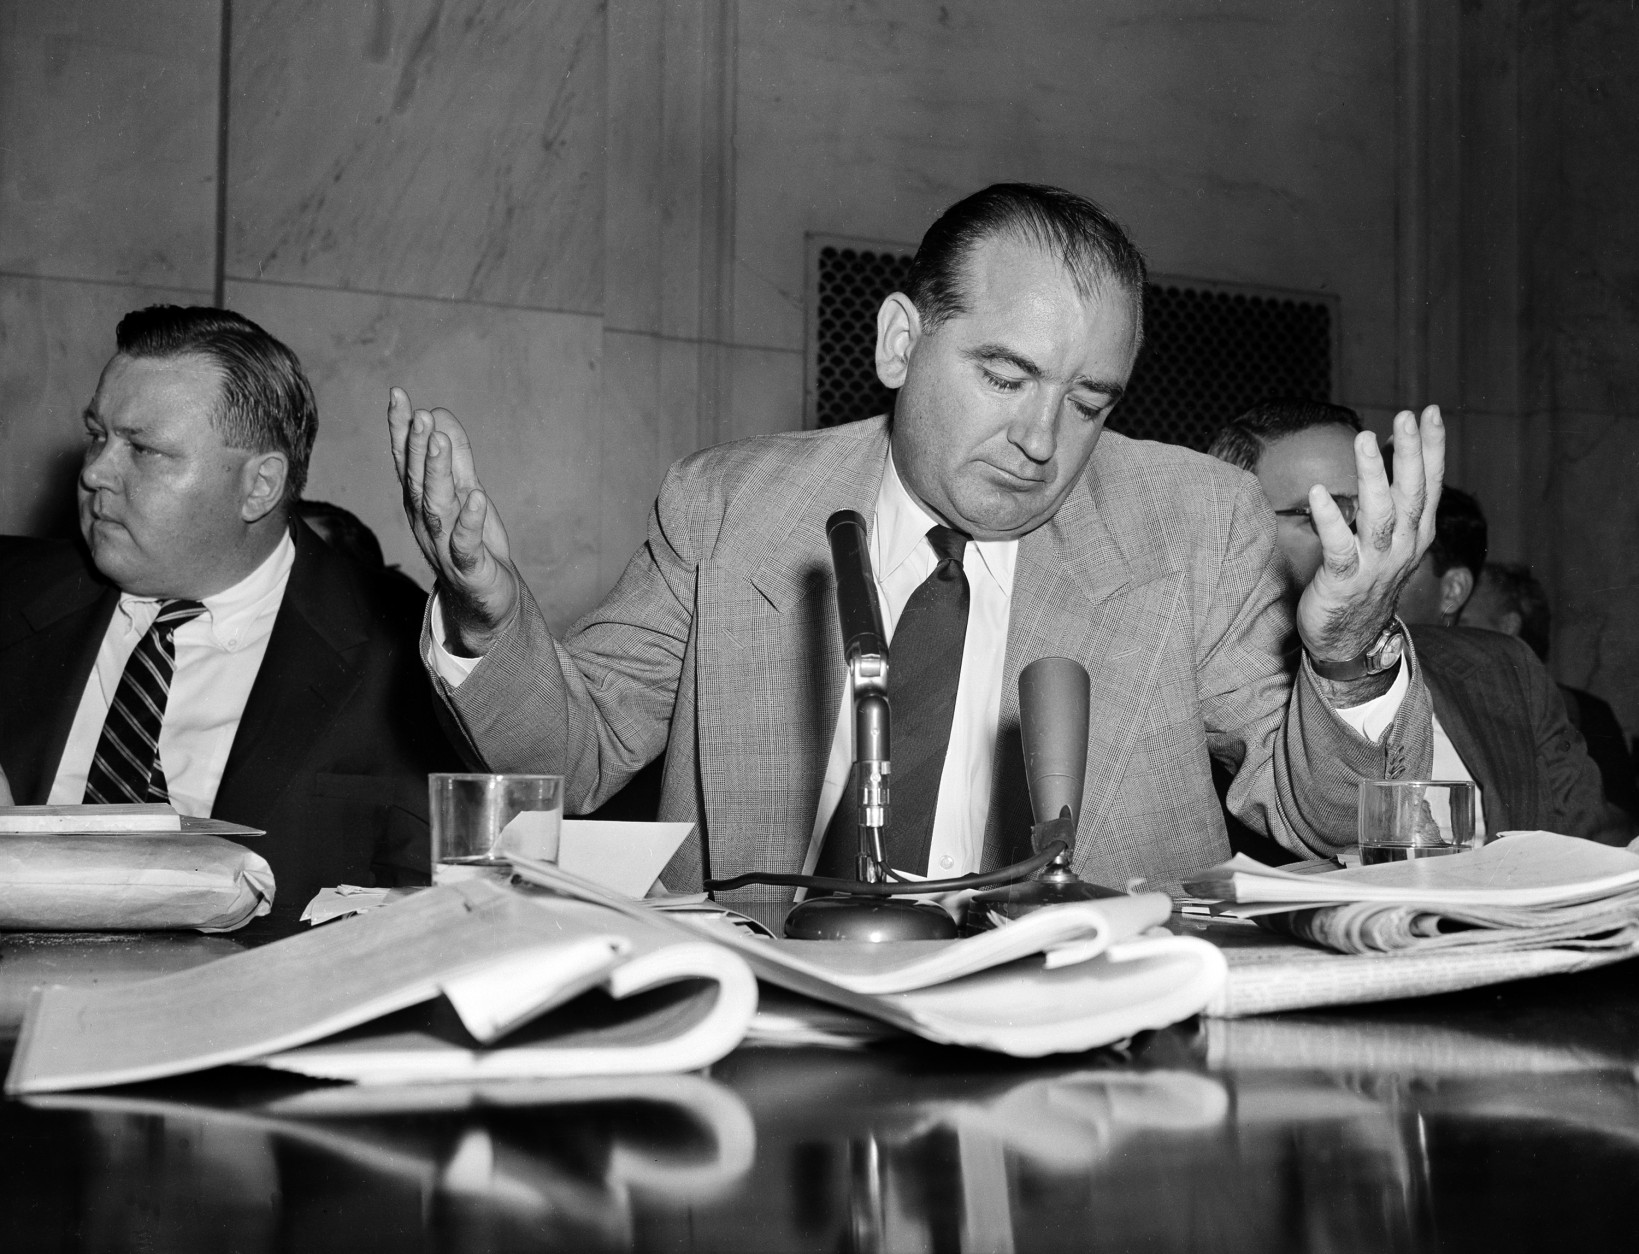 Sen. Joseph McCarthy, R-Wis., gives a resigned shrug at being unable to get across with one of his "point of order" interruptions, during the Senate Investigation Subcommittee hearing, in Washington, D.C., April 30, 1954. Pvt. G. David Schine was in the witness chair at the time. (AP Photo/WF)